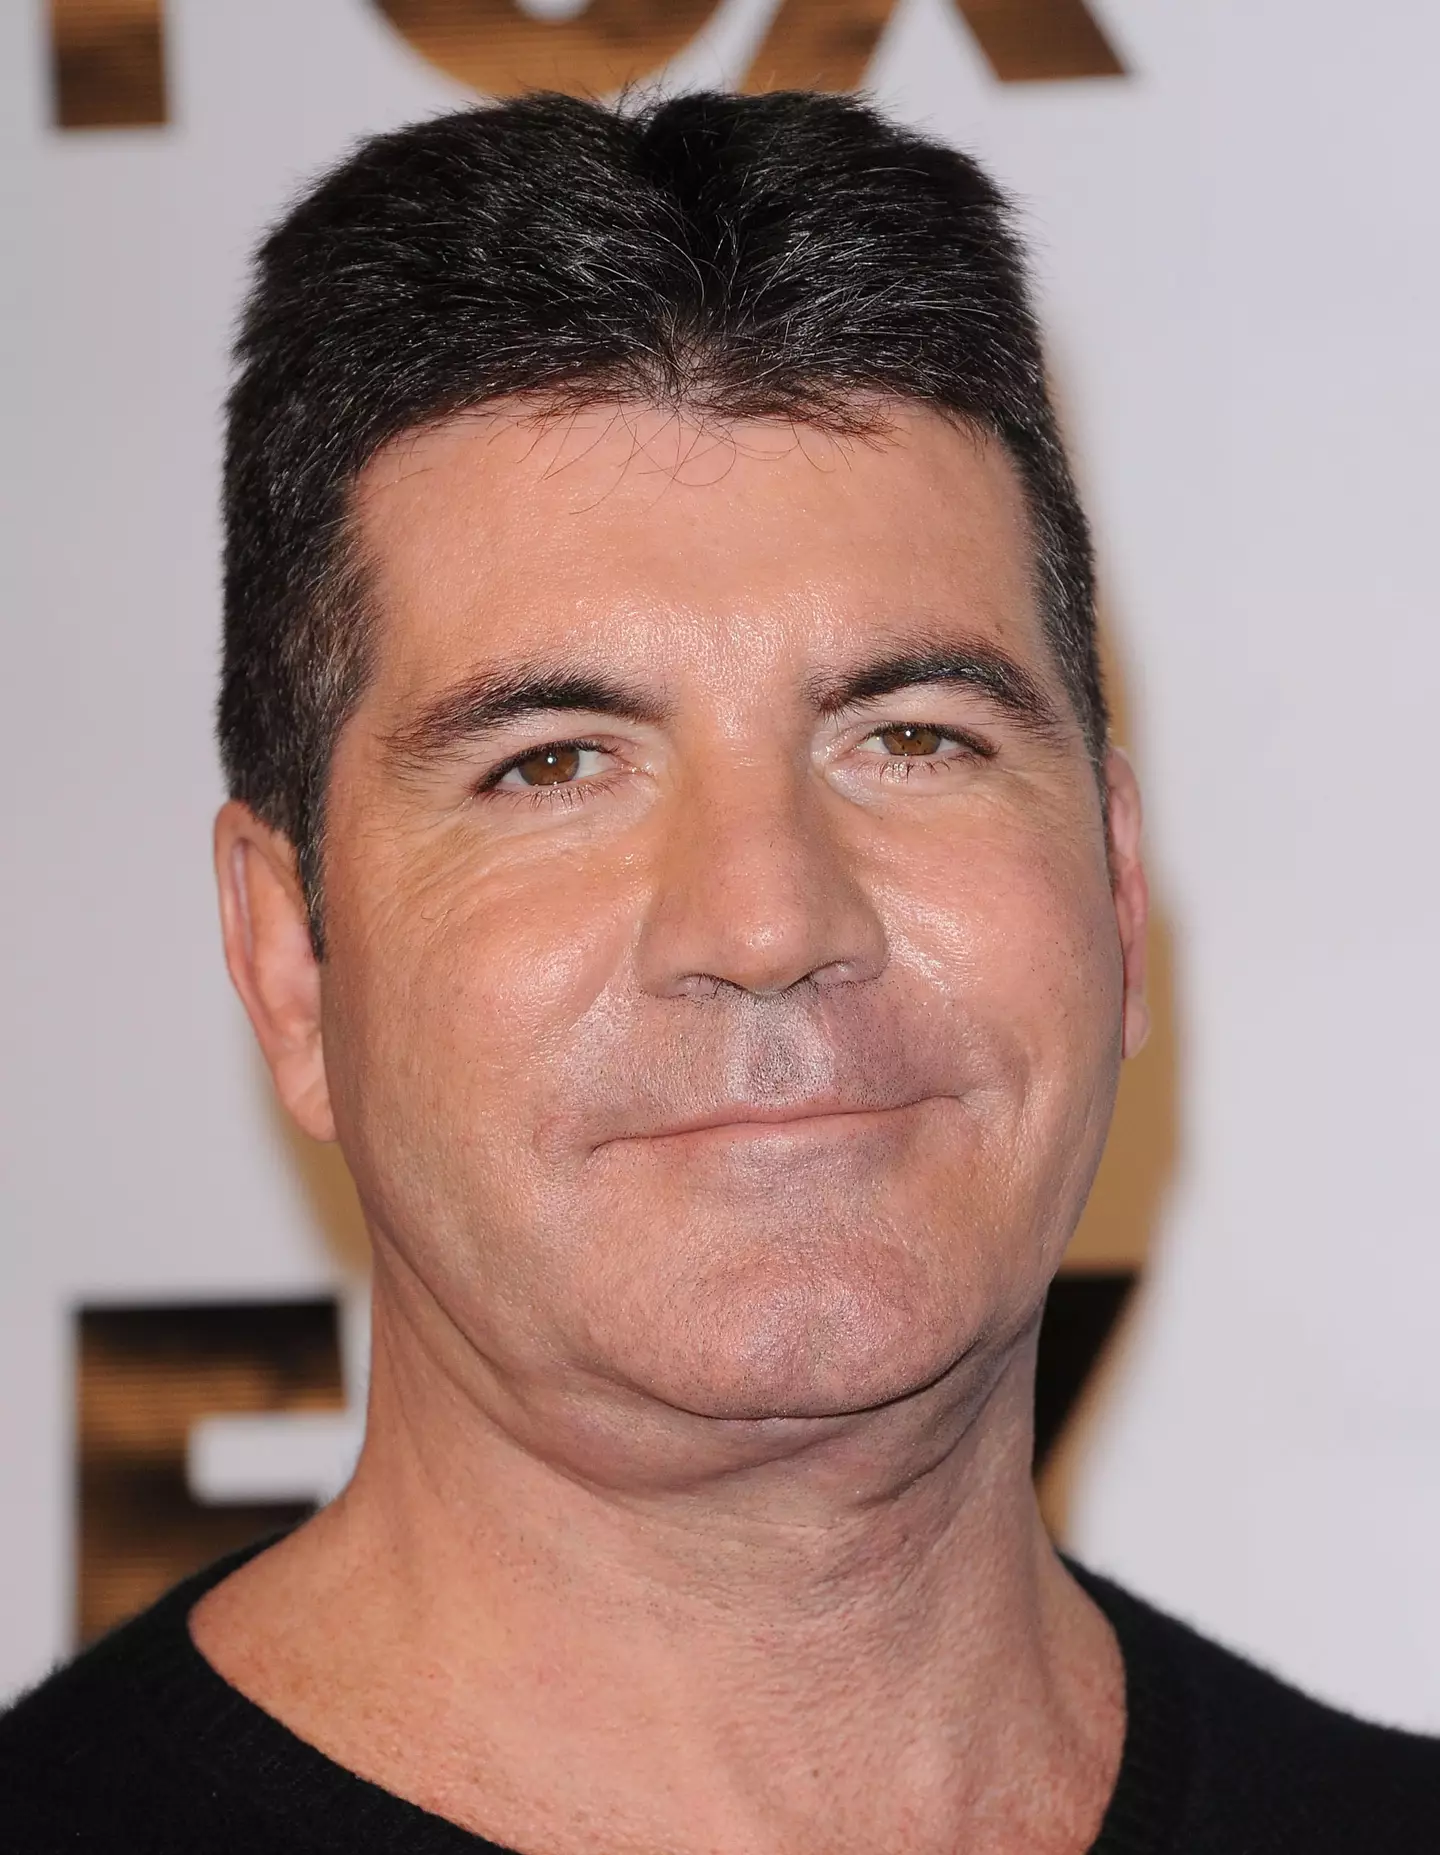 Cowell even gave his BGT co-stars £350 Botox vouchers for Christmas one year.